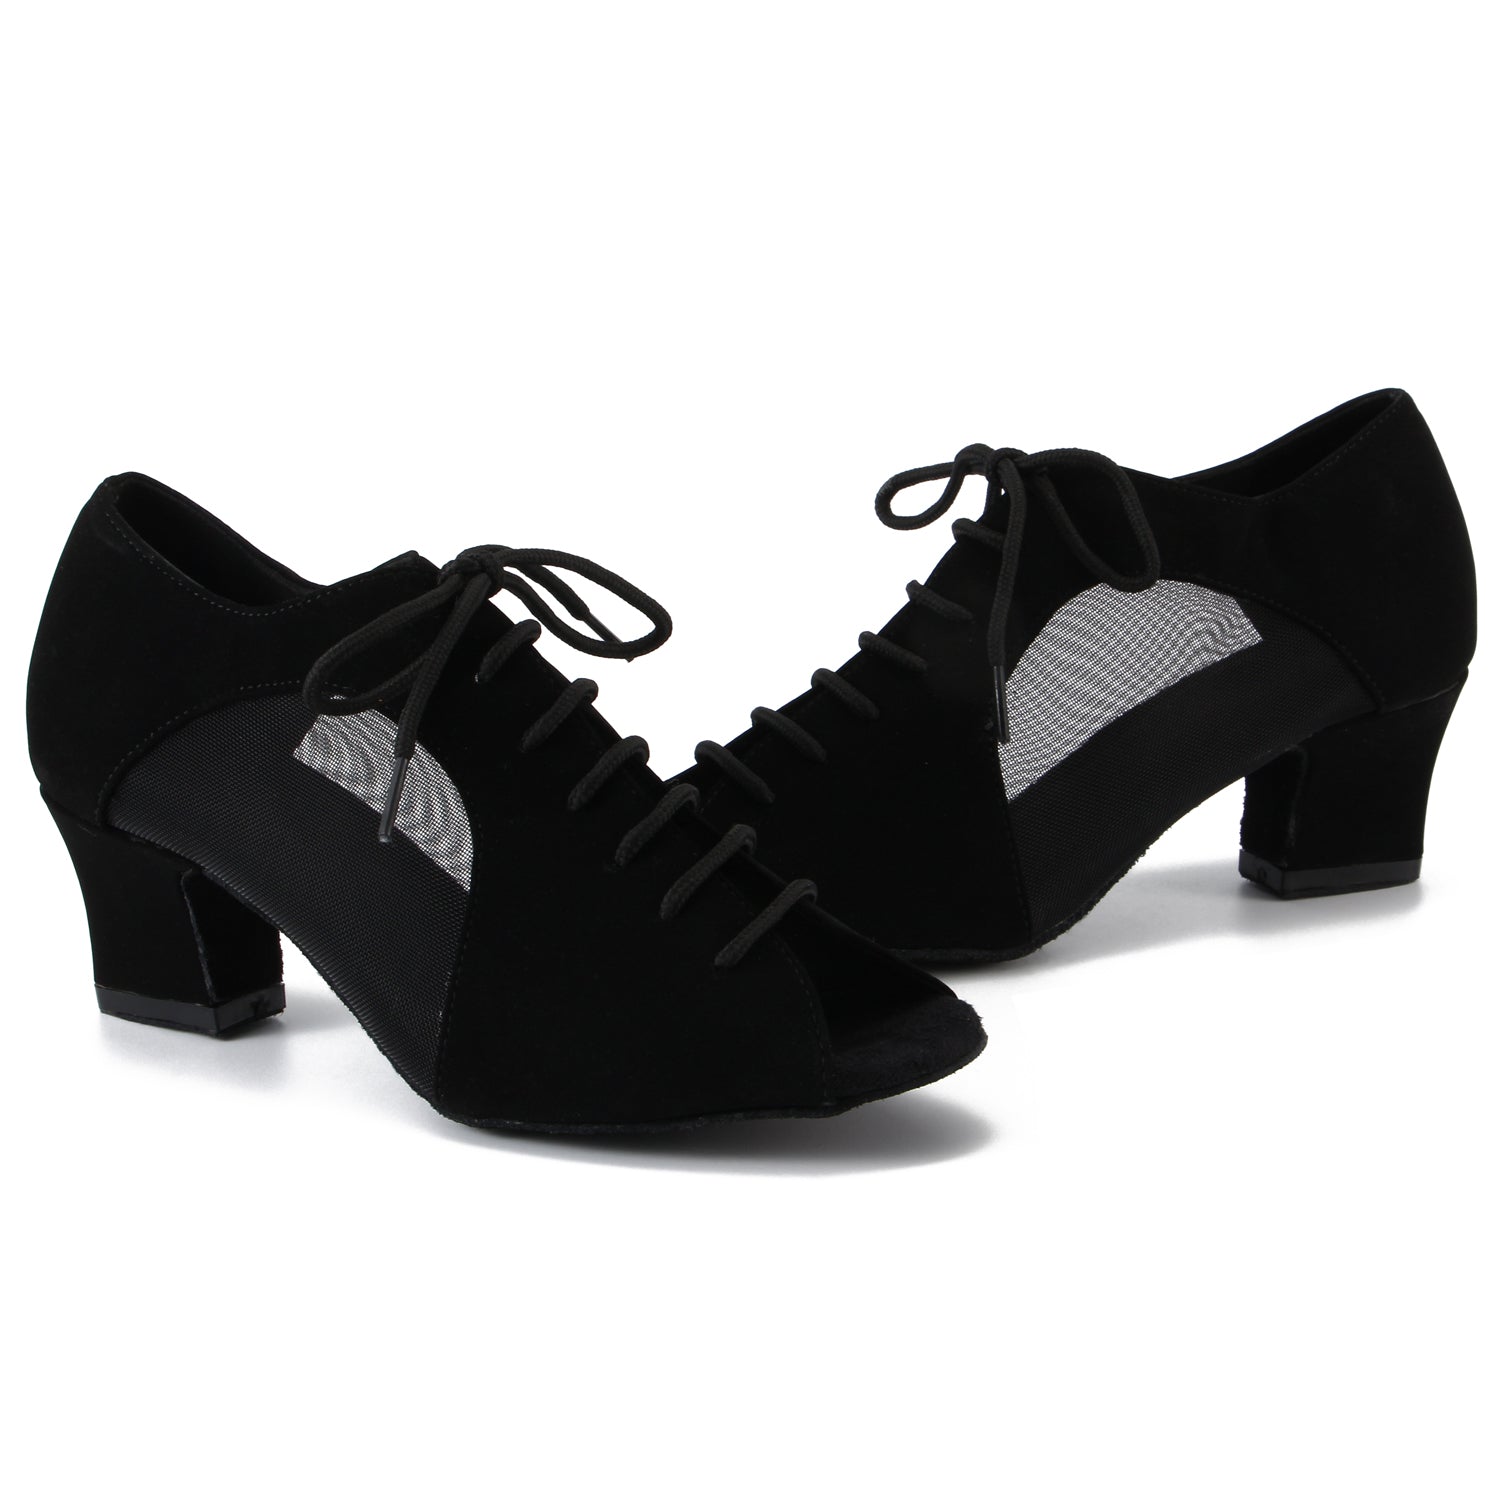 Women Ballroom Dancing Shoes with Suede Sole, Lace-up Open-toe Design in Black for Tango Latin Practice (PD-3003A)8